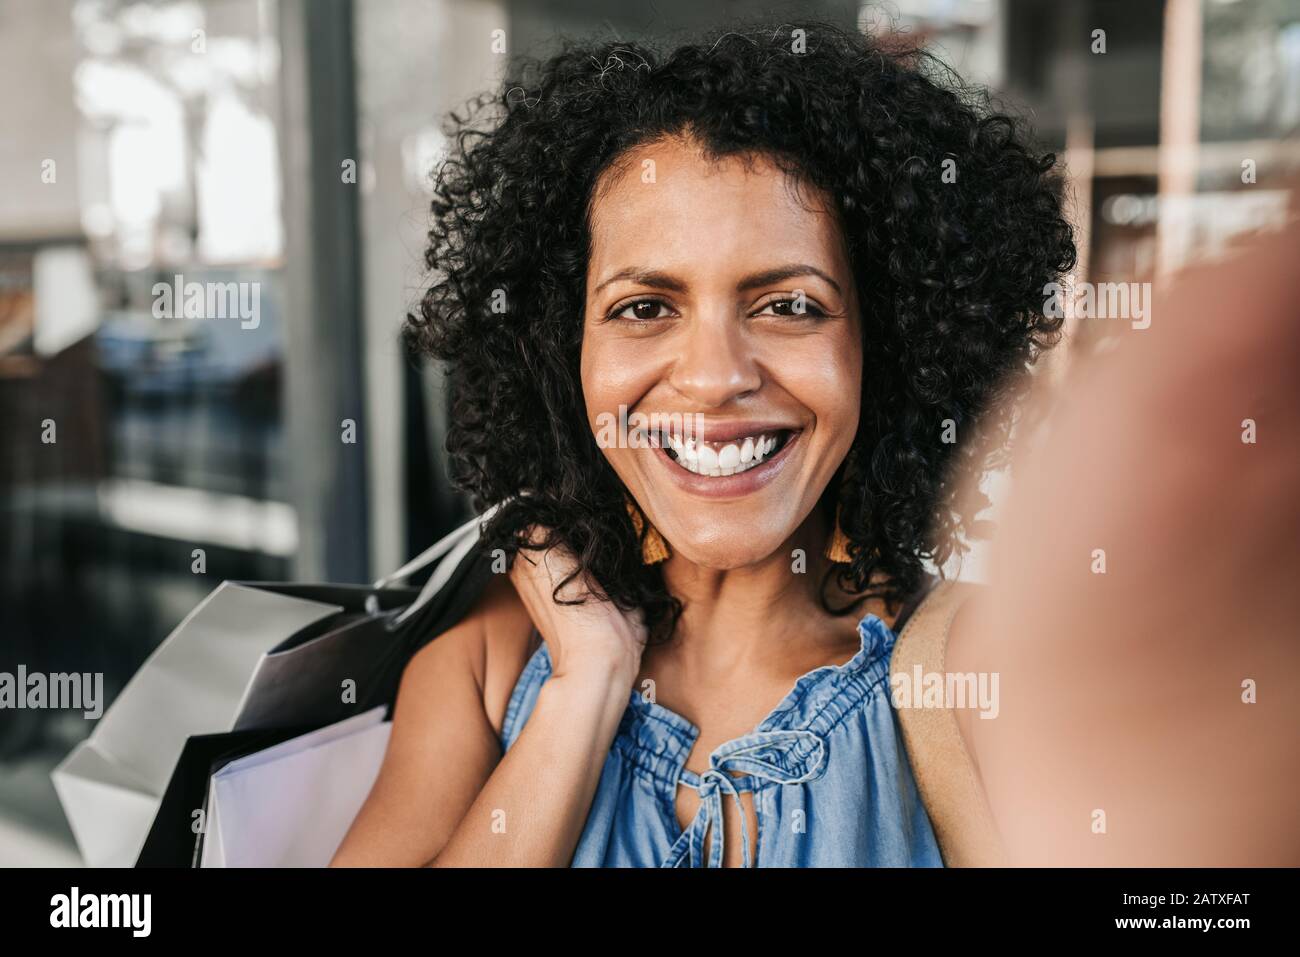 Young woman smiling and taking a selfie while out shopping Stock Photo